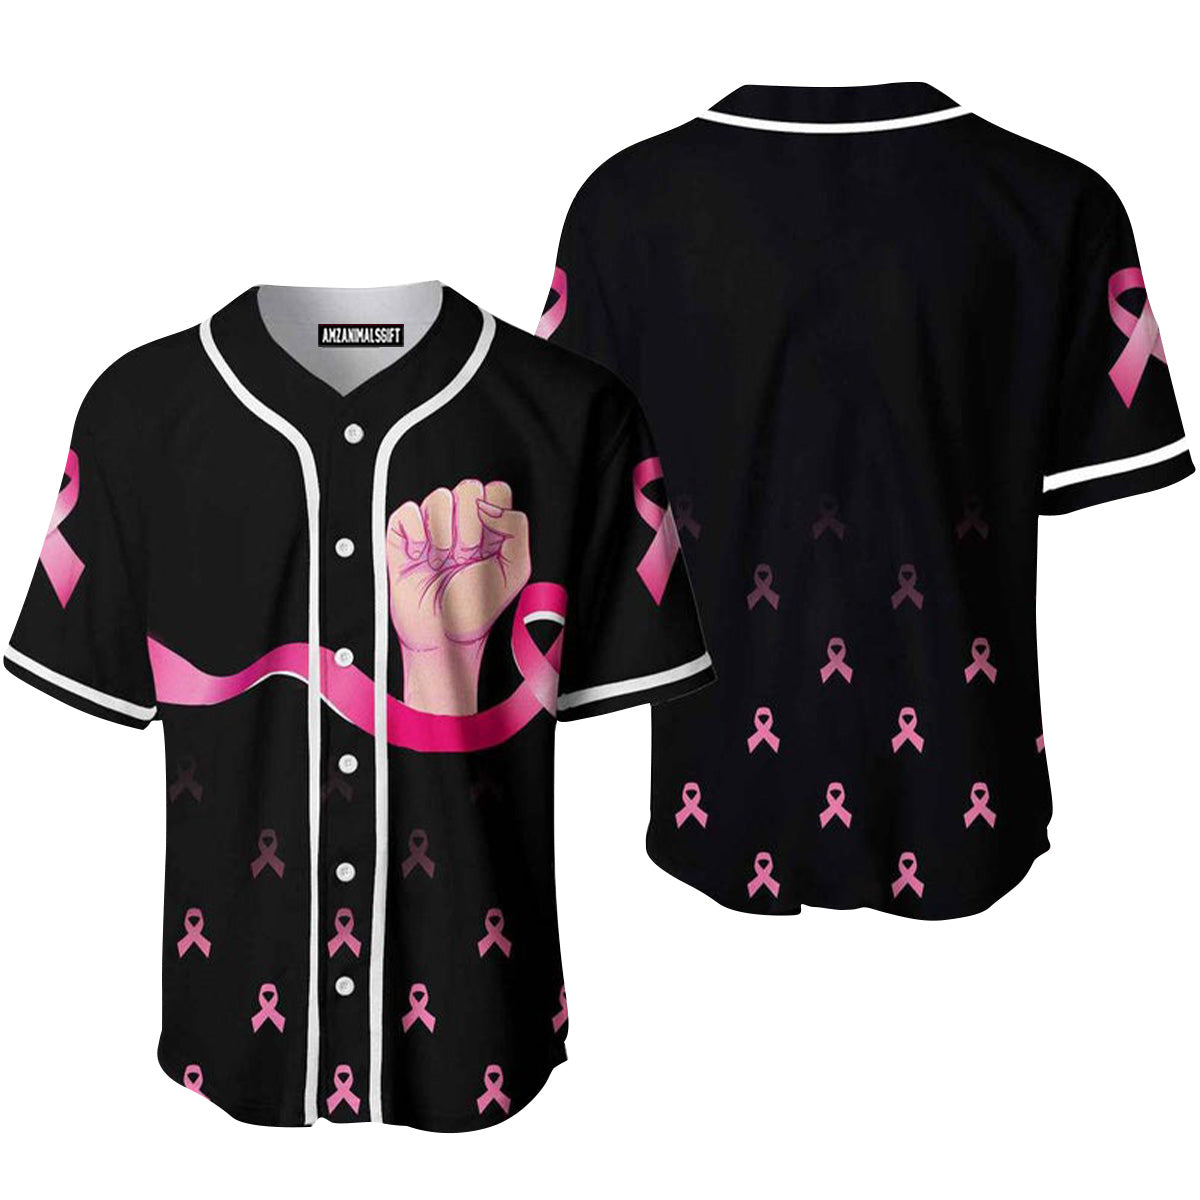 Amazing Breast Cancer Fighters Baseball Jersey, Perfect Outfit For Men And Women On Breast Cancer Survivors Baseball Team Baseball Fans